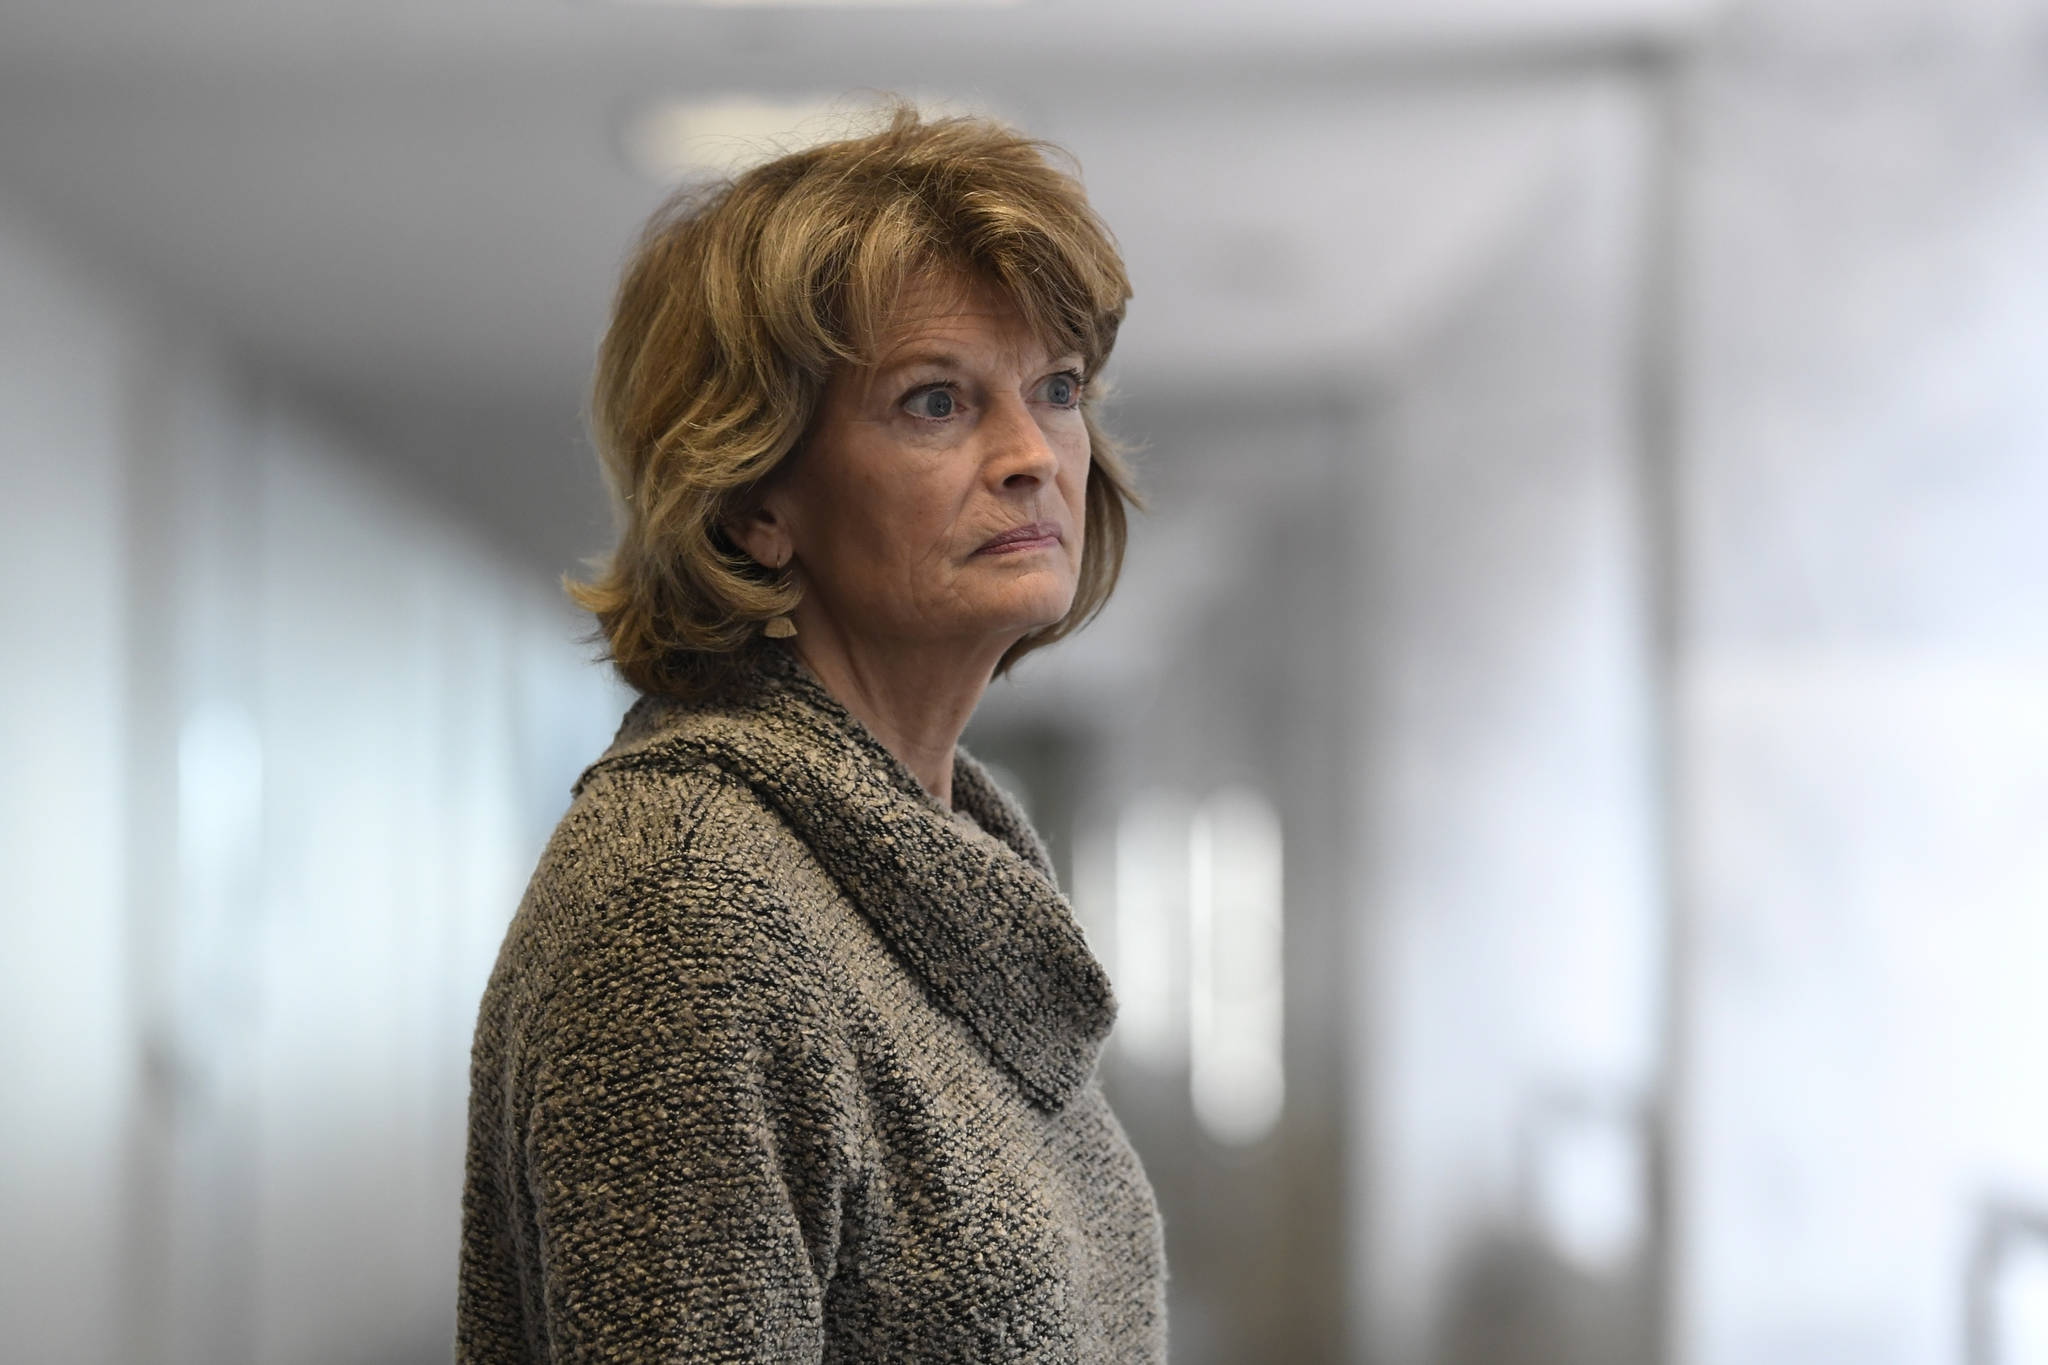 Sen. Lisa Murkowski, R-Alaska, talks with reporters following a Republican policy lunch on Capitol Hill in Washington, Thursday, March 19, 2020. Murkowski was among a group of lawmakers who wrote a letter to President Donald Trump asking federal money be allocated quickly and in a way that respects tribal sovereignty. (AP Photo | Susan Walsh)